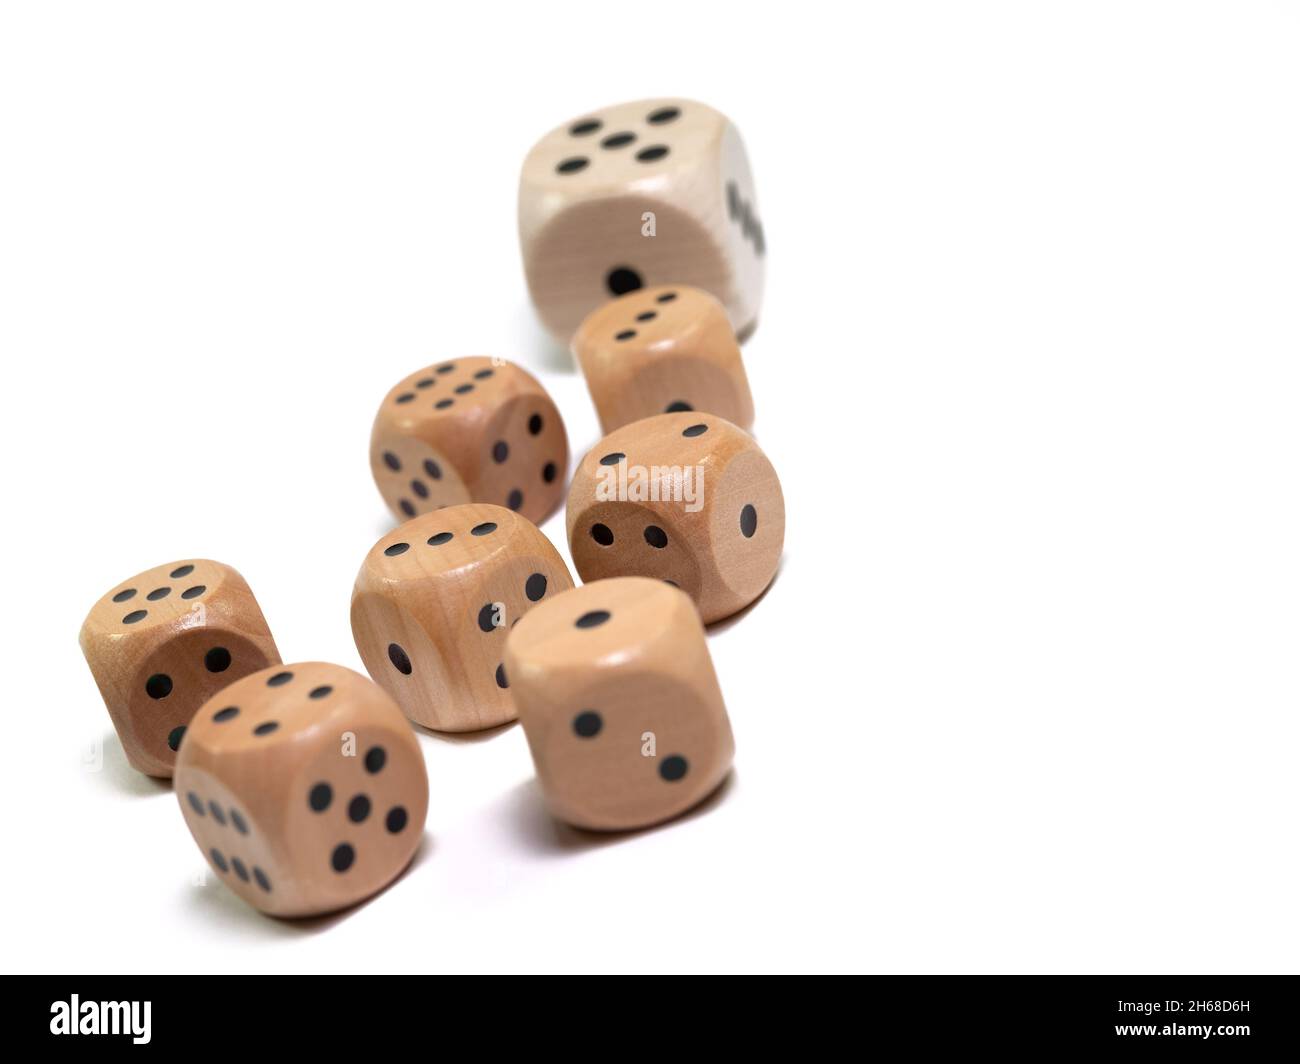 Wooden game dice against a white background Stock Photo